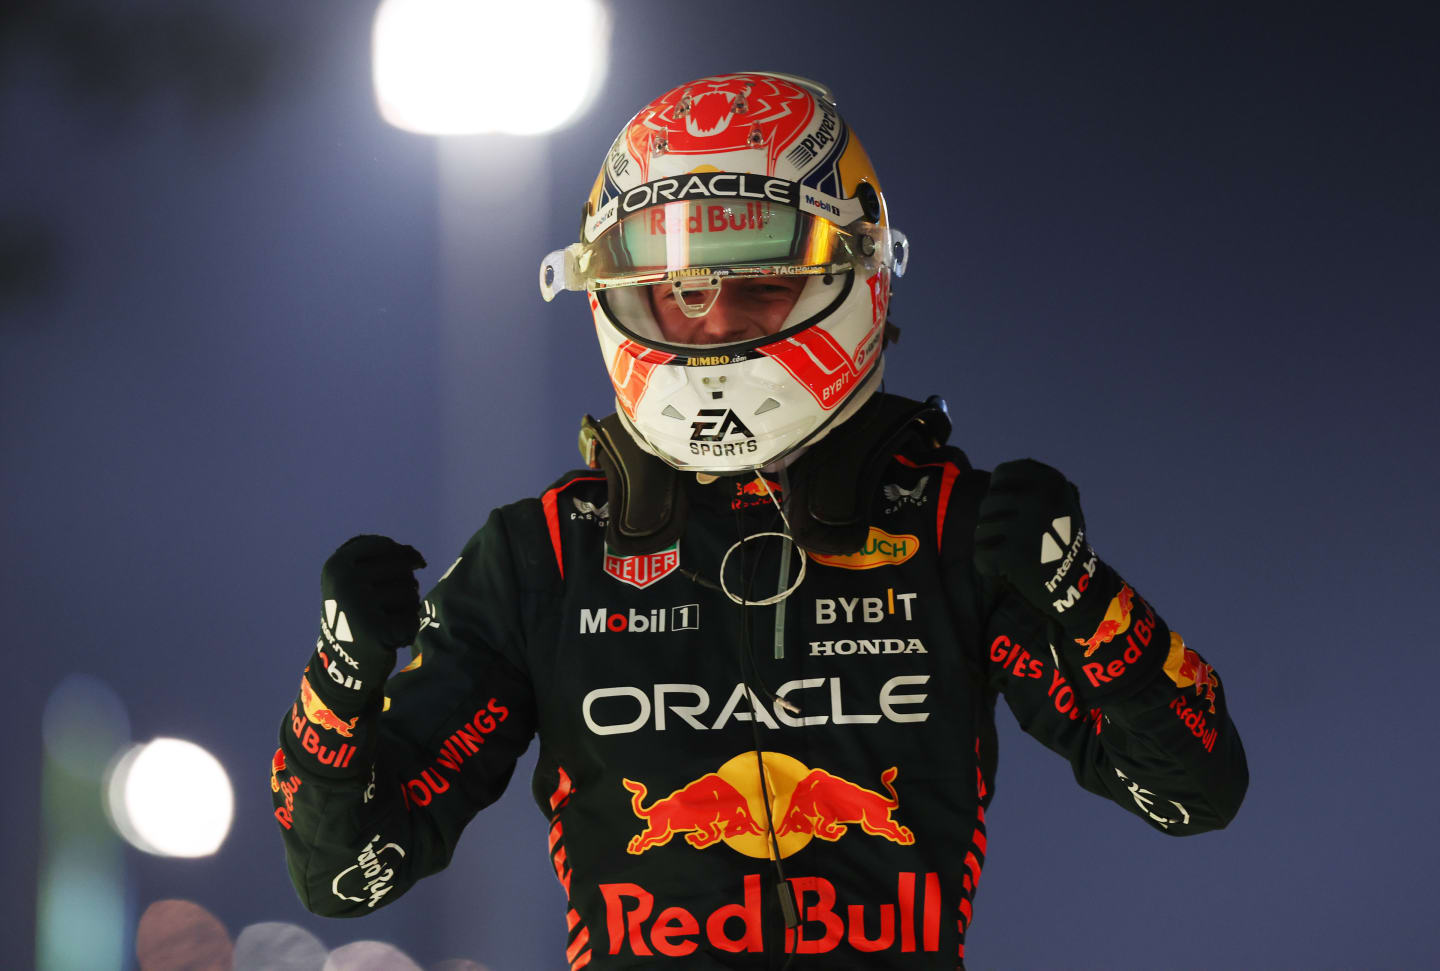 BAHRAIN, BAHRAIN - MARCH 05: Race winner Max Verstappen of the Netherlands and Oracle Red Bull Racing celebrates in parc ferme during the F1 Grand Prix of Bahrain at Bahrain International Circuit on March 05, 2023 in Bahrain, Bahrain. (Photo by Lars Baron/Getty Images)